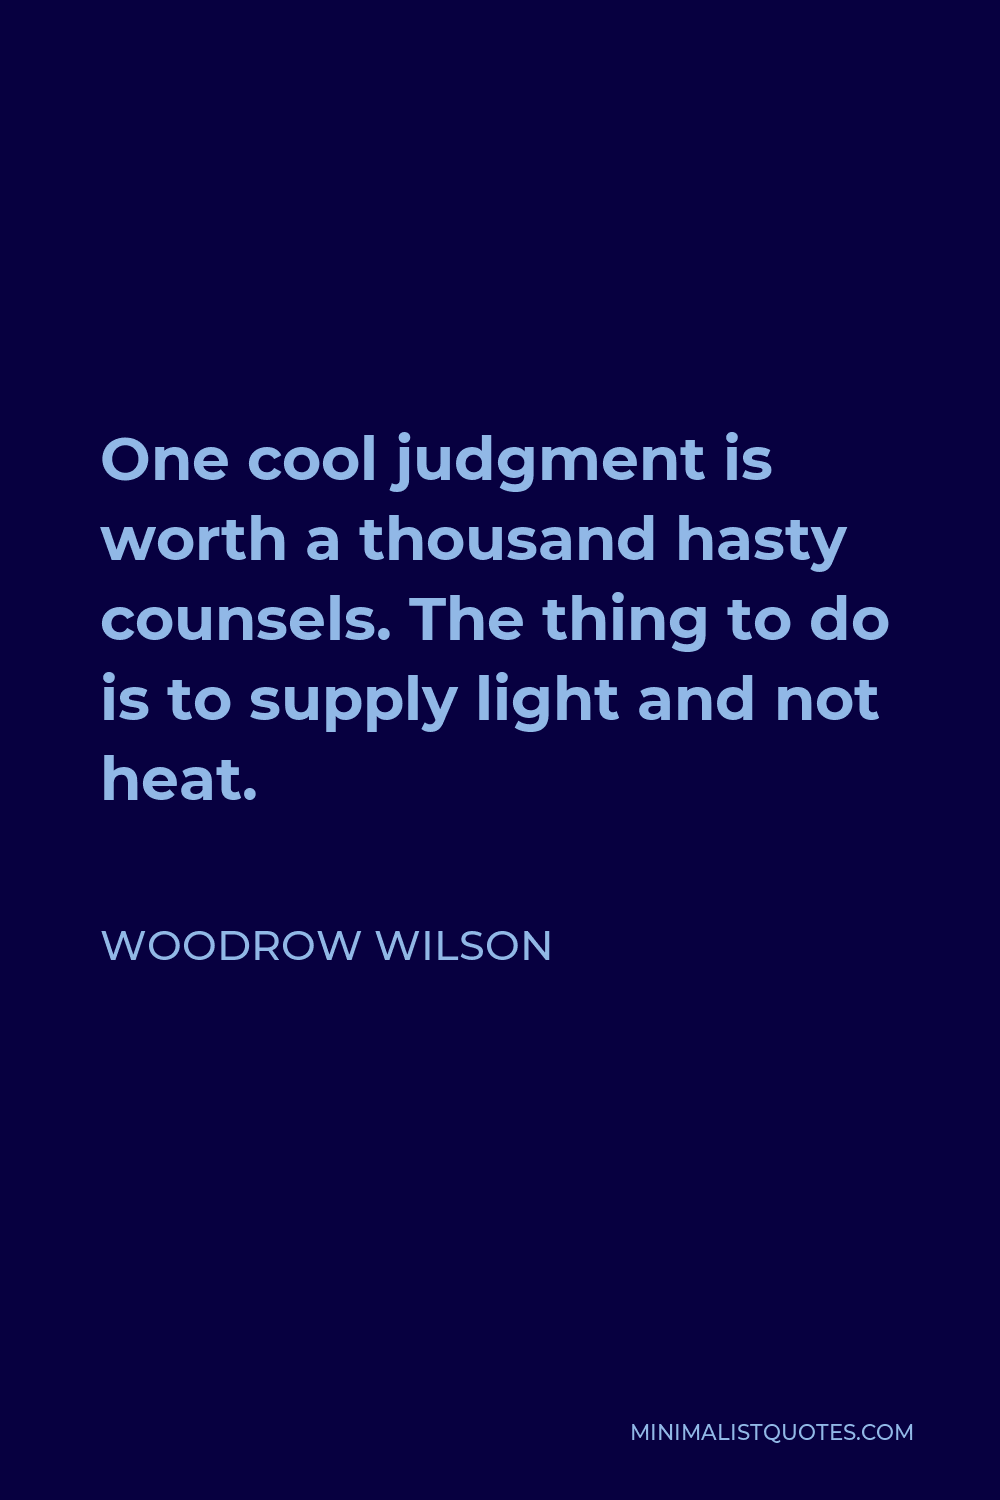 Woodrow Wilson Quote - One cool judgment is worth a thousand hasty counsels. The thing to do is to supply light and not heat.